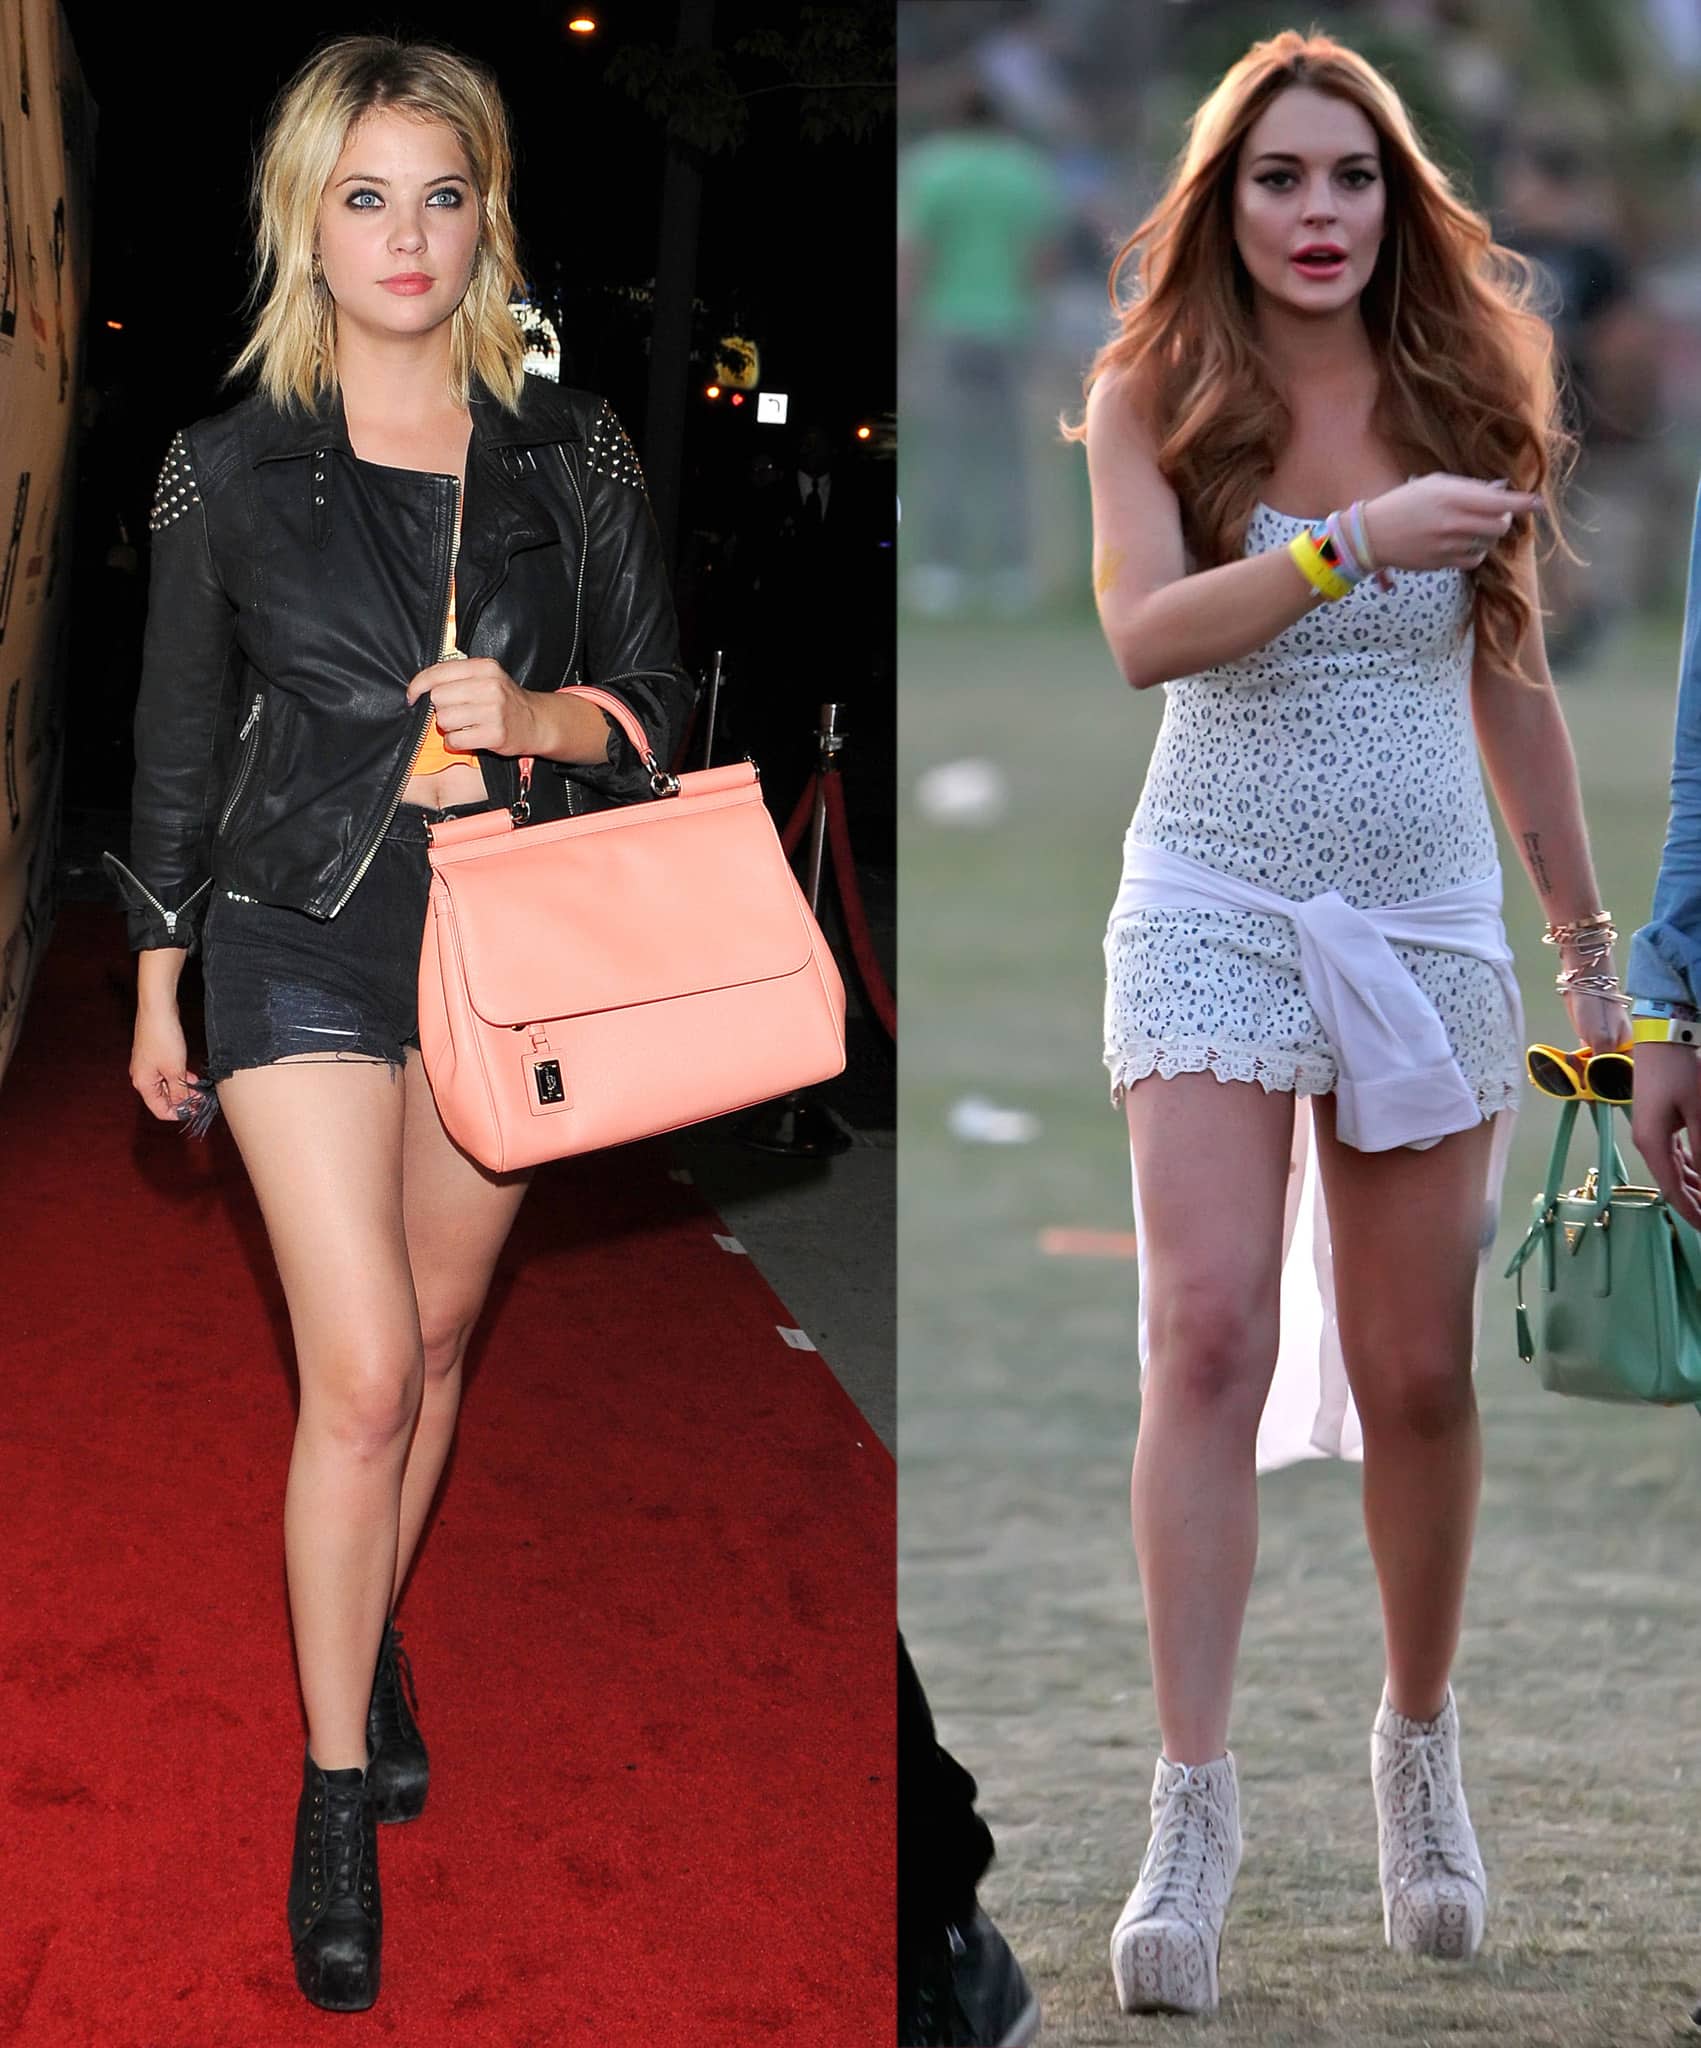 Ashley Benson and Lindsay Lohan pictured in 2021 wearing the Jeffrey Campbell Lita boots